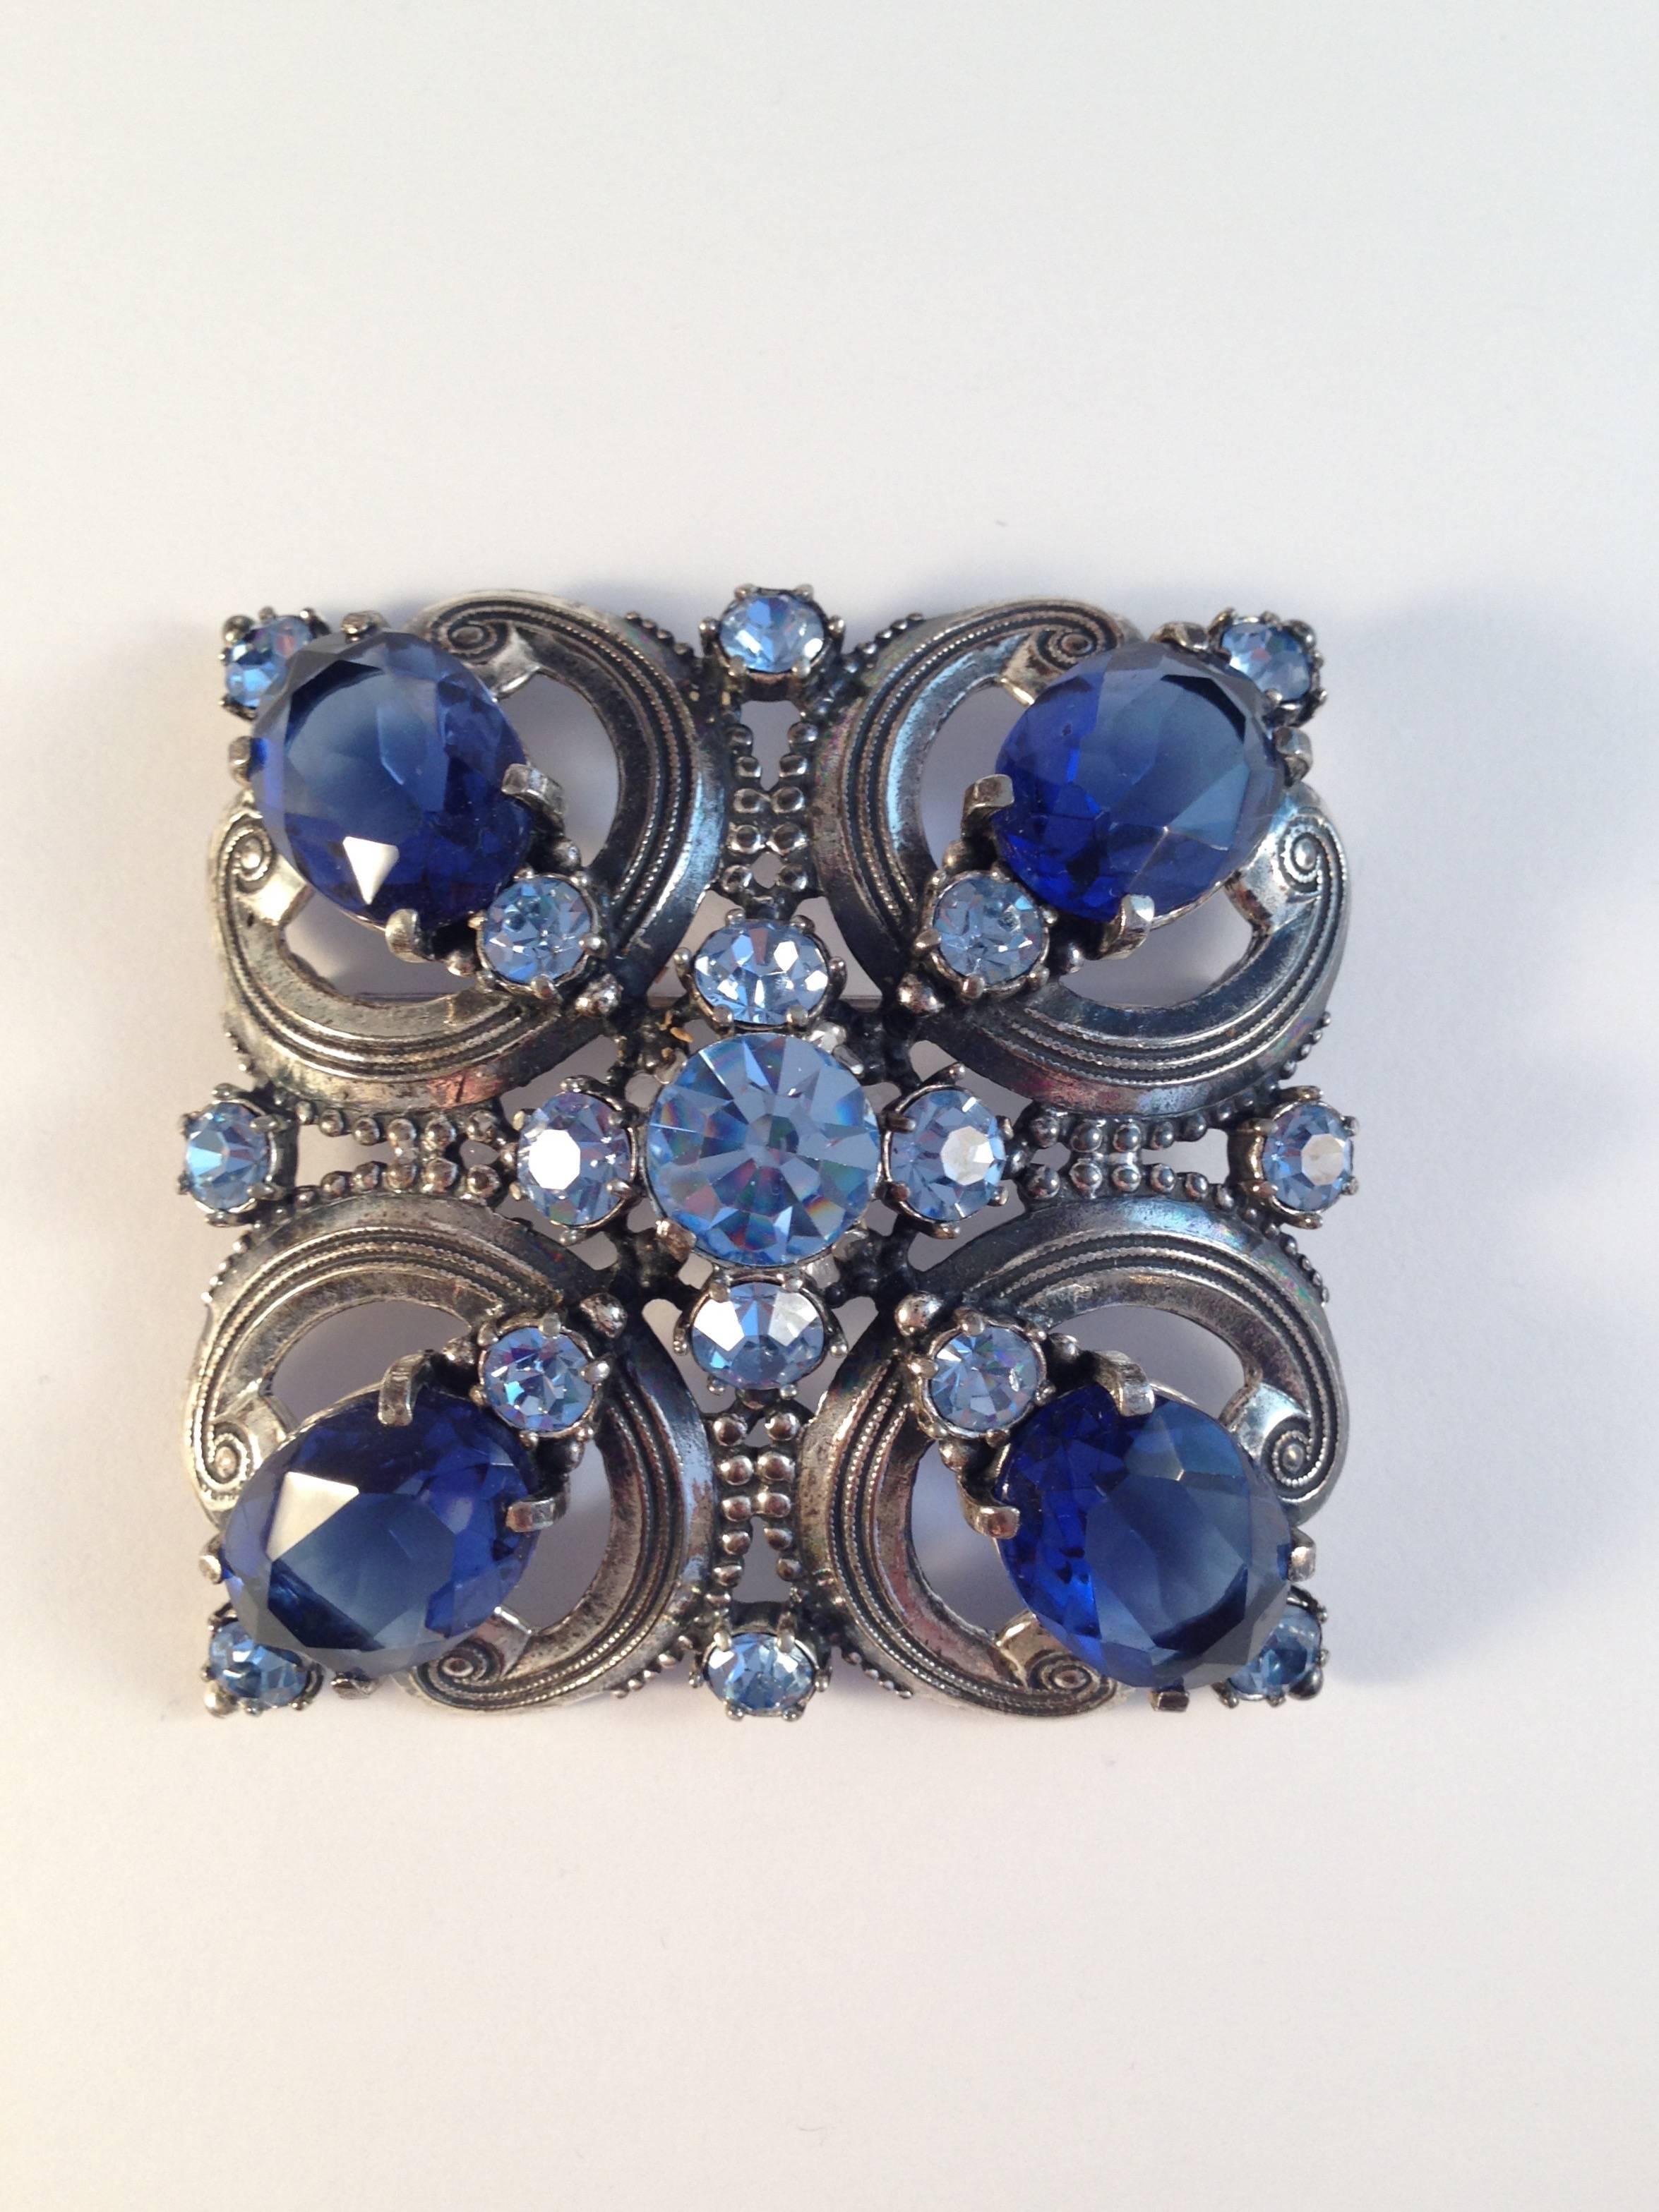 This is a beautiful blue and silver-tone 1940s Elsa Schiaparelli brooch and clip-on earrings set. The brooch measures 2 3/8" x 2 3/8". It is silver-tone metal set with beautiful sapphire blue and light blue glass stones. It is in very good